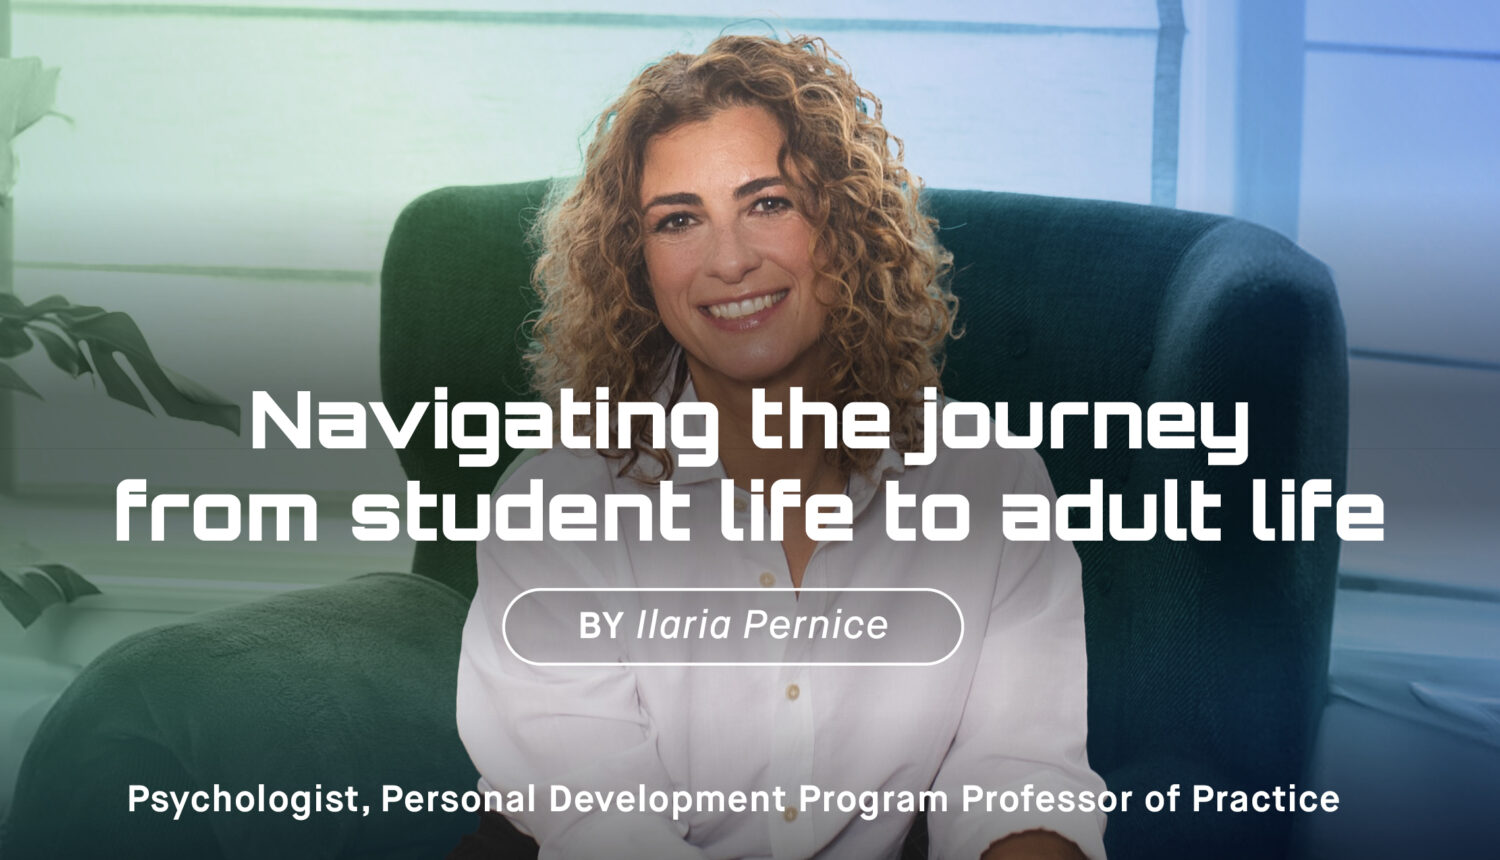 Navigating the journey from student life to adult life